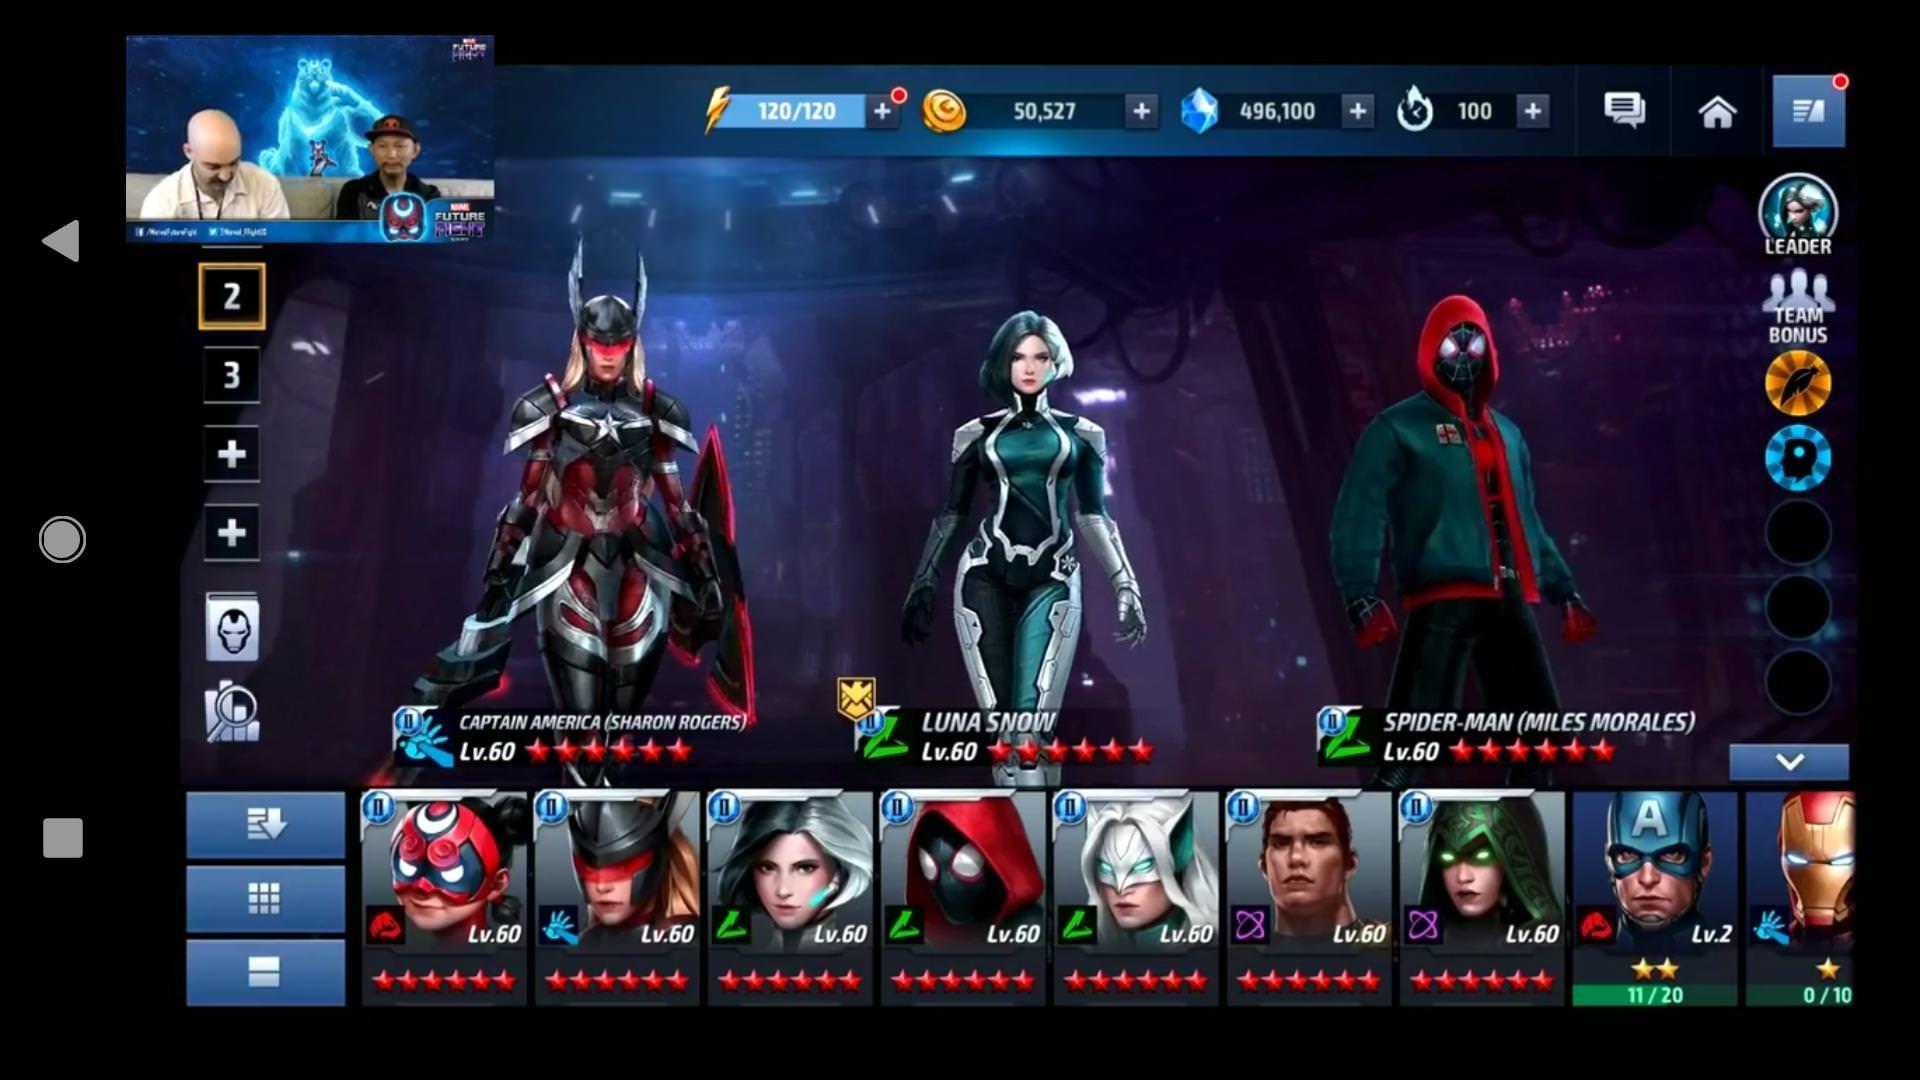 New unis for Sharon Rogers, Luna Snow, and Miles Morales